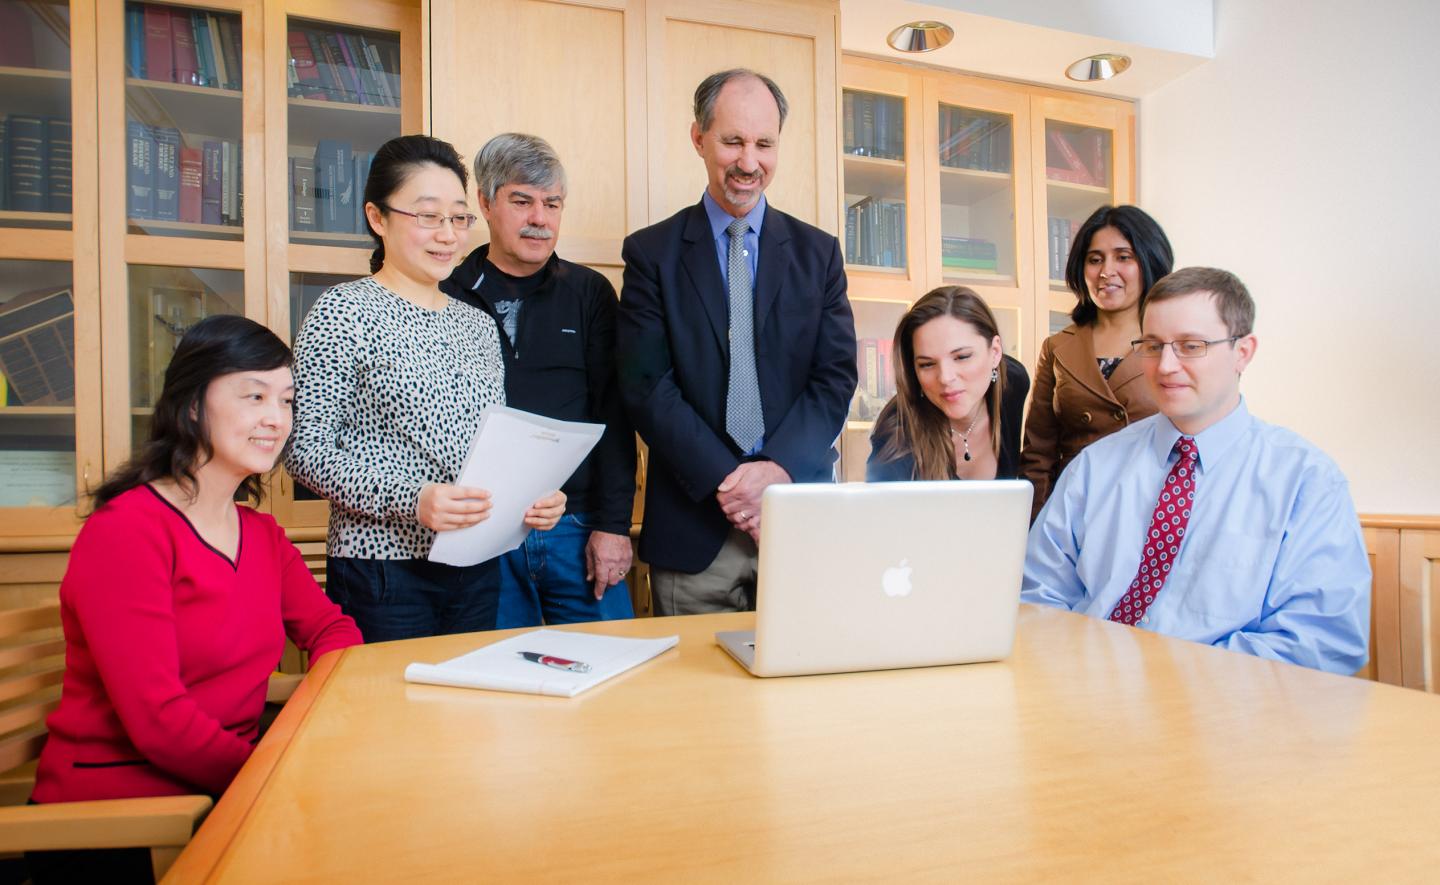 Dr. Baskin's research team at UCSF